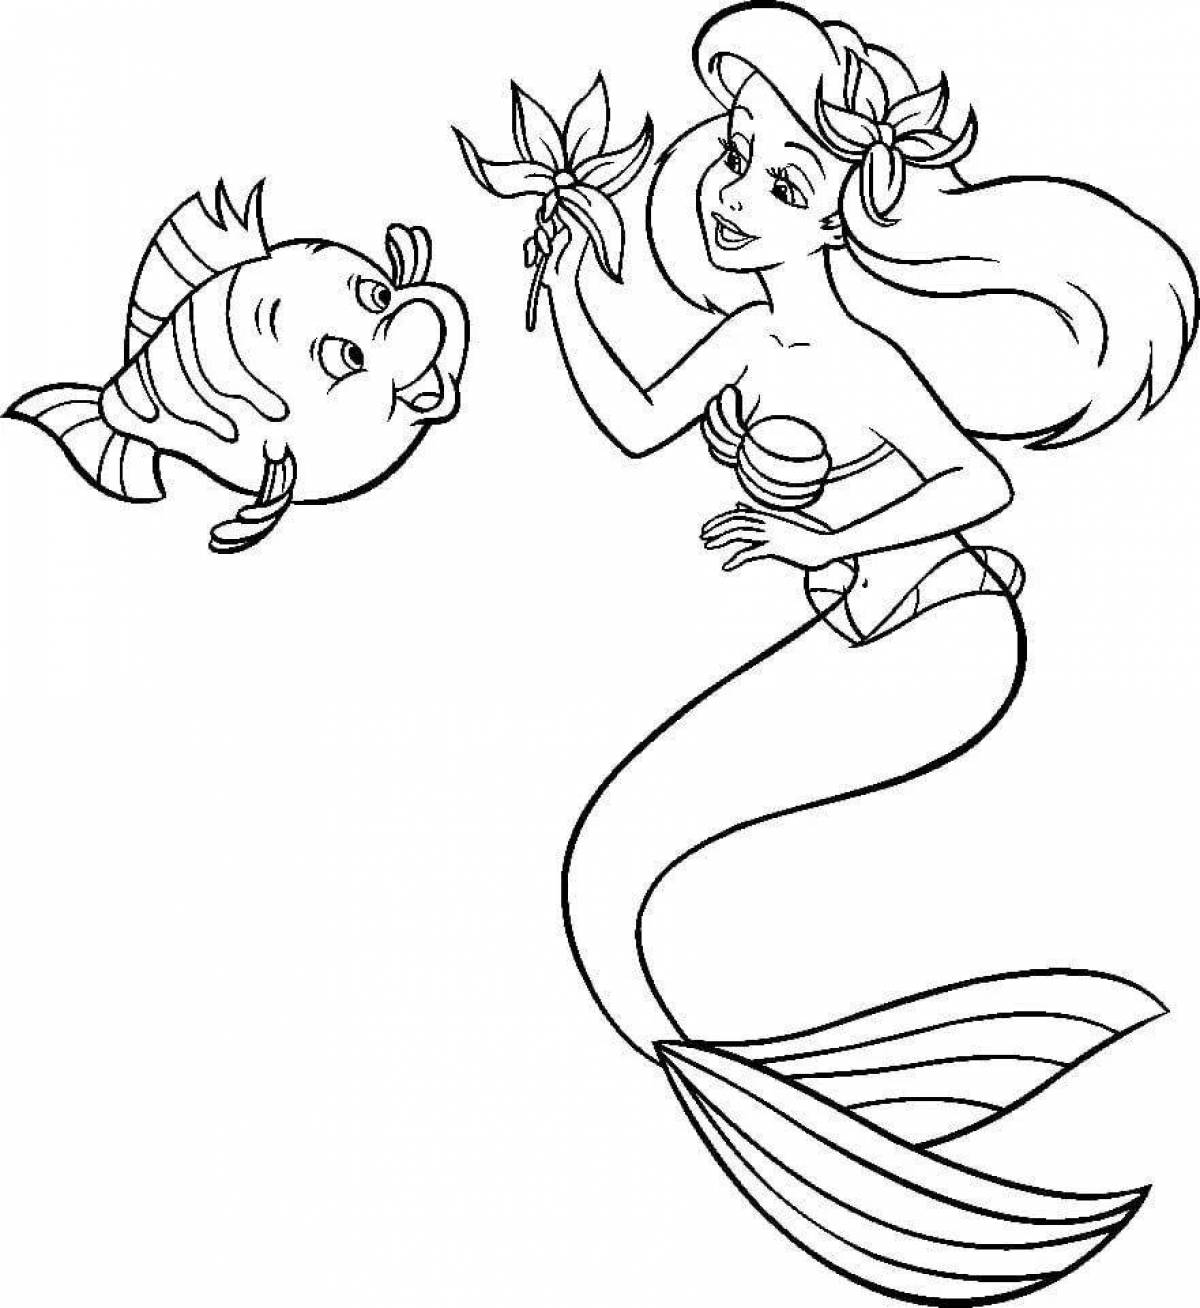 Cute little mermaid coloring book for 4-5 year olds